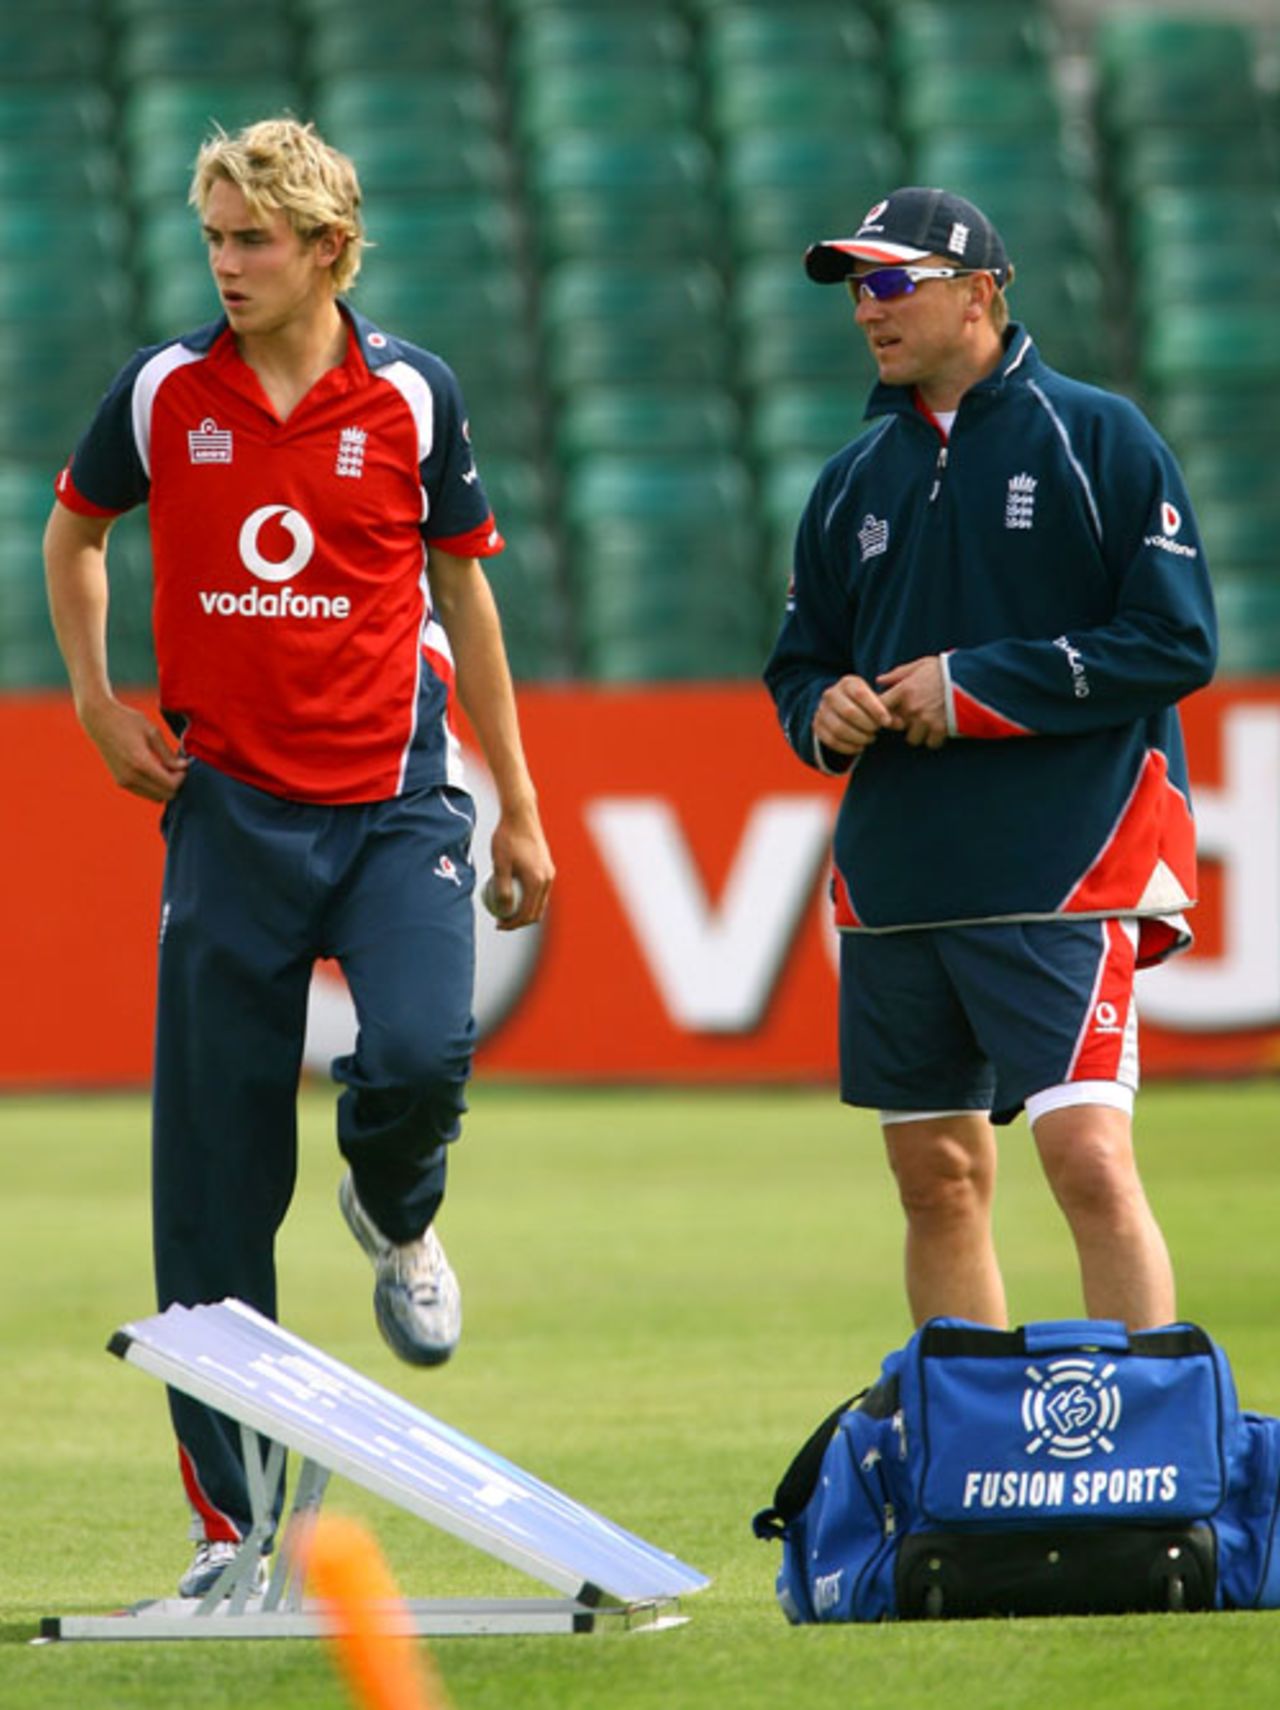 Stuart Broad has a chat with Allan Donald, the bowling coach, County Ground, Bristol, August 23, 2007